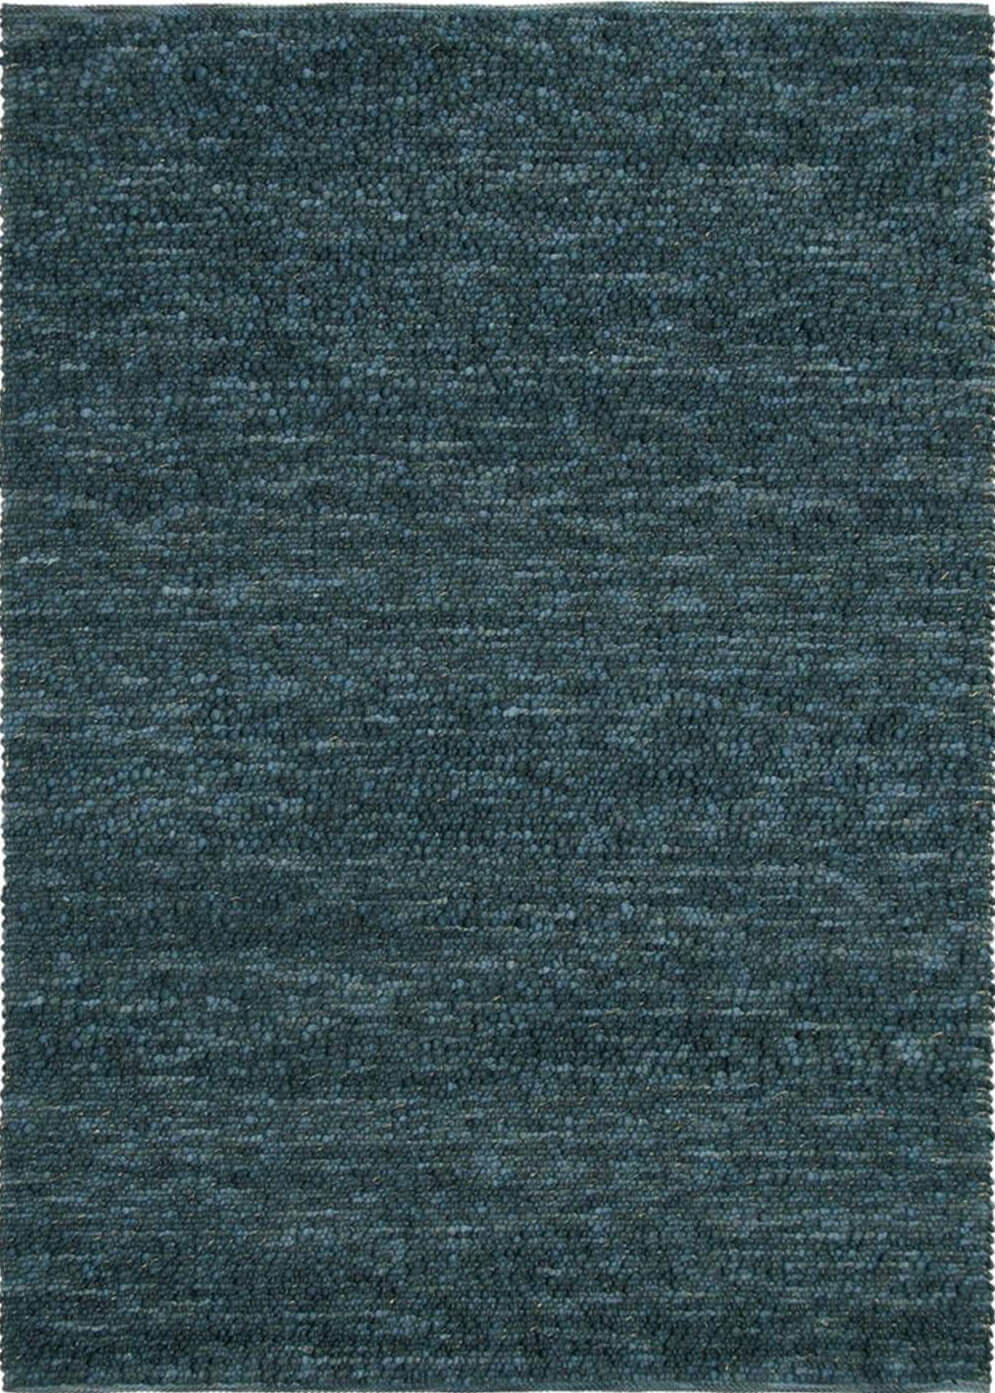 Stubble 29708 Rug by Brink & Campman